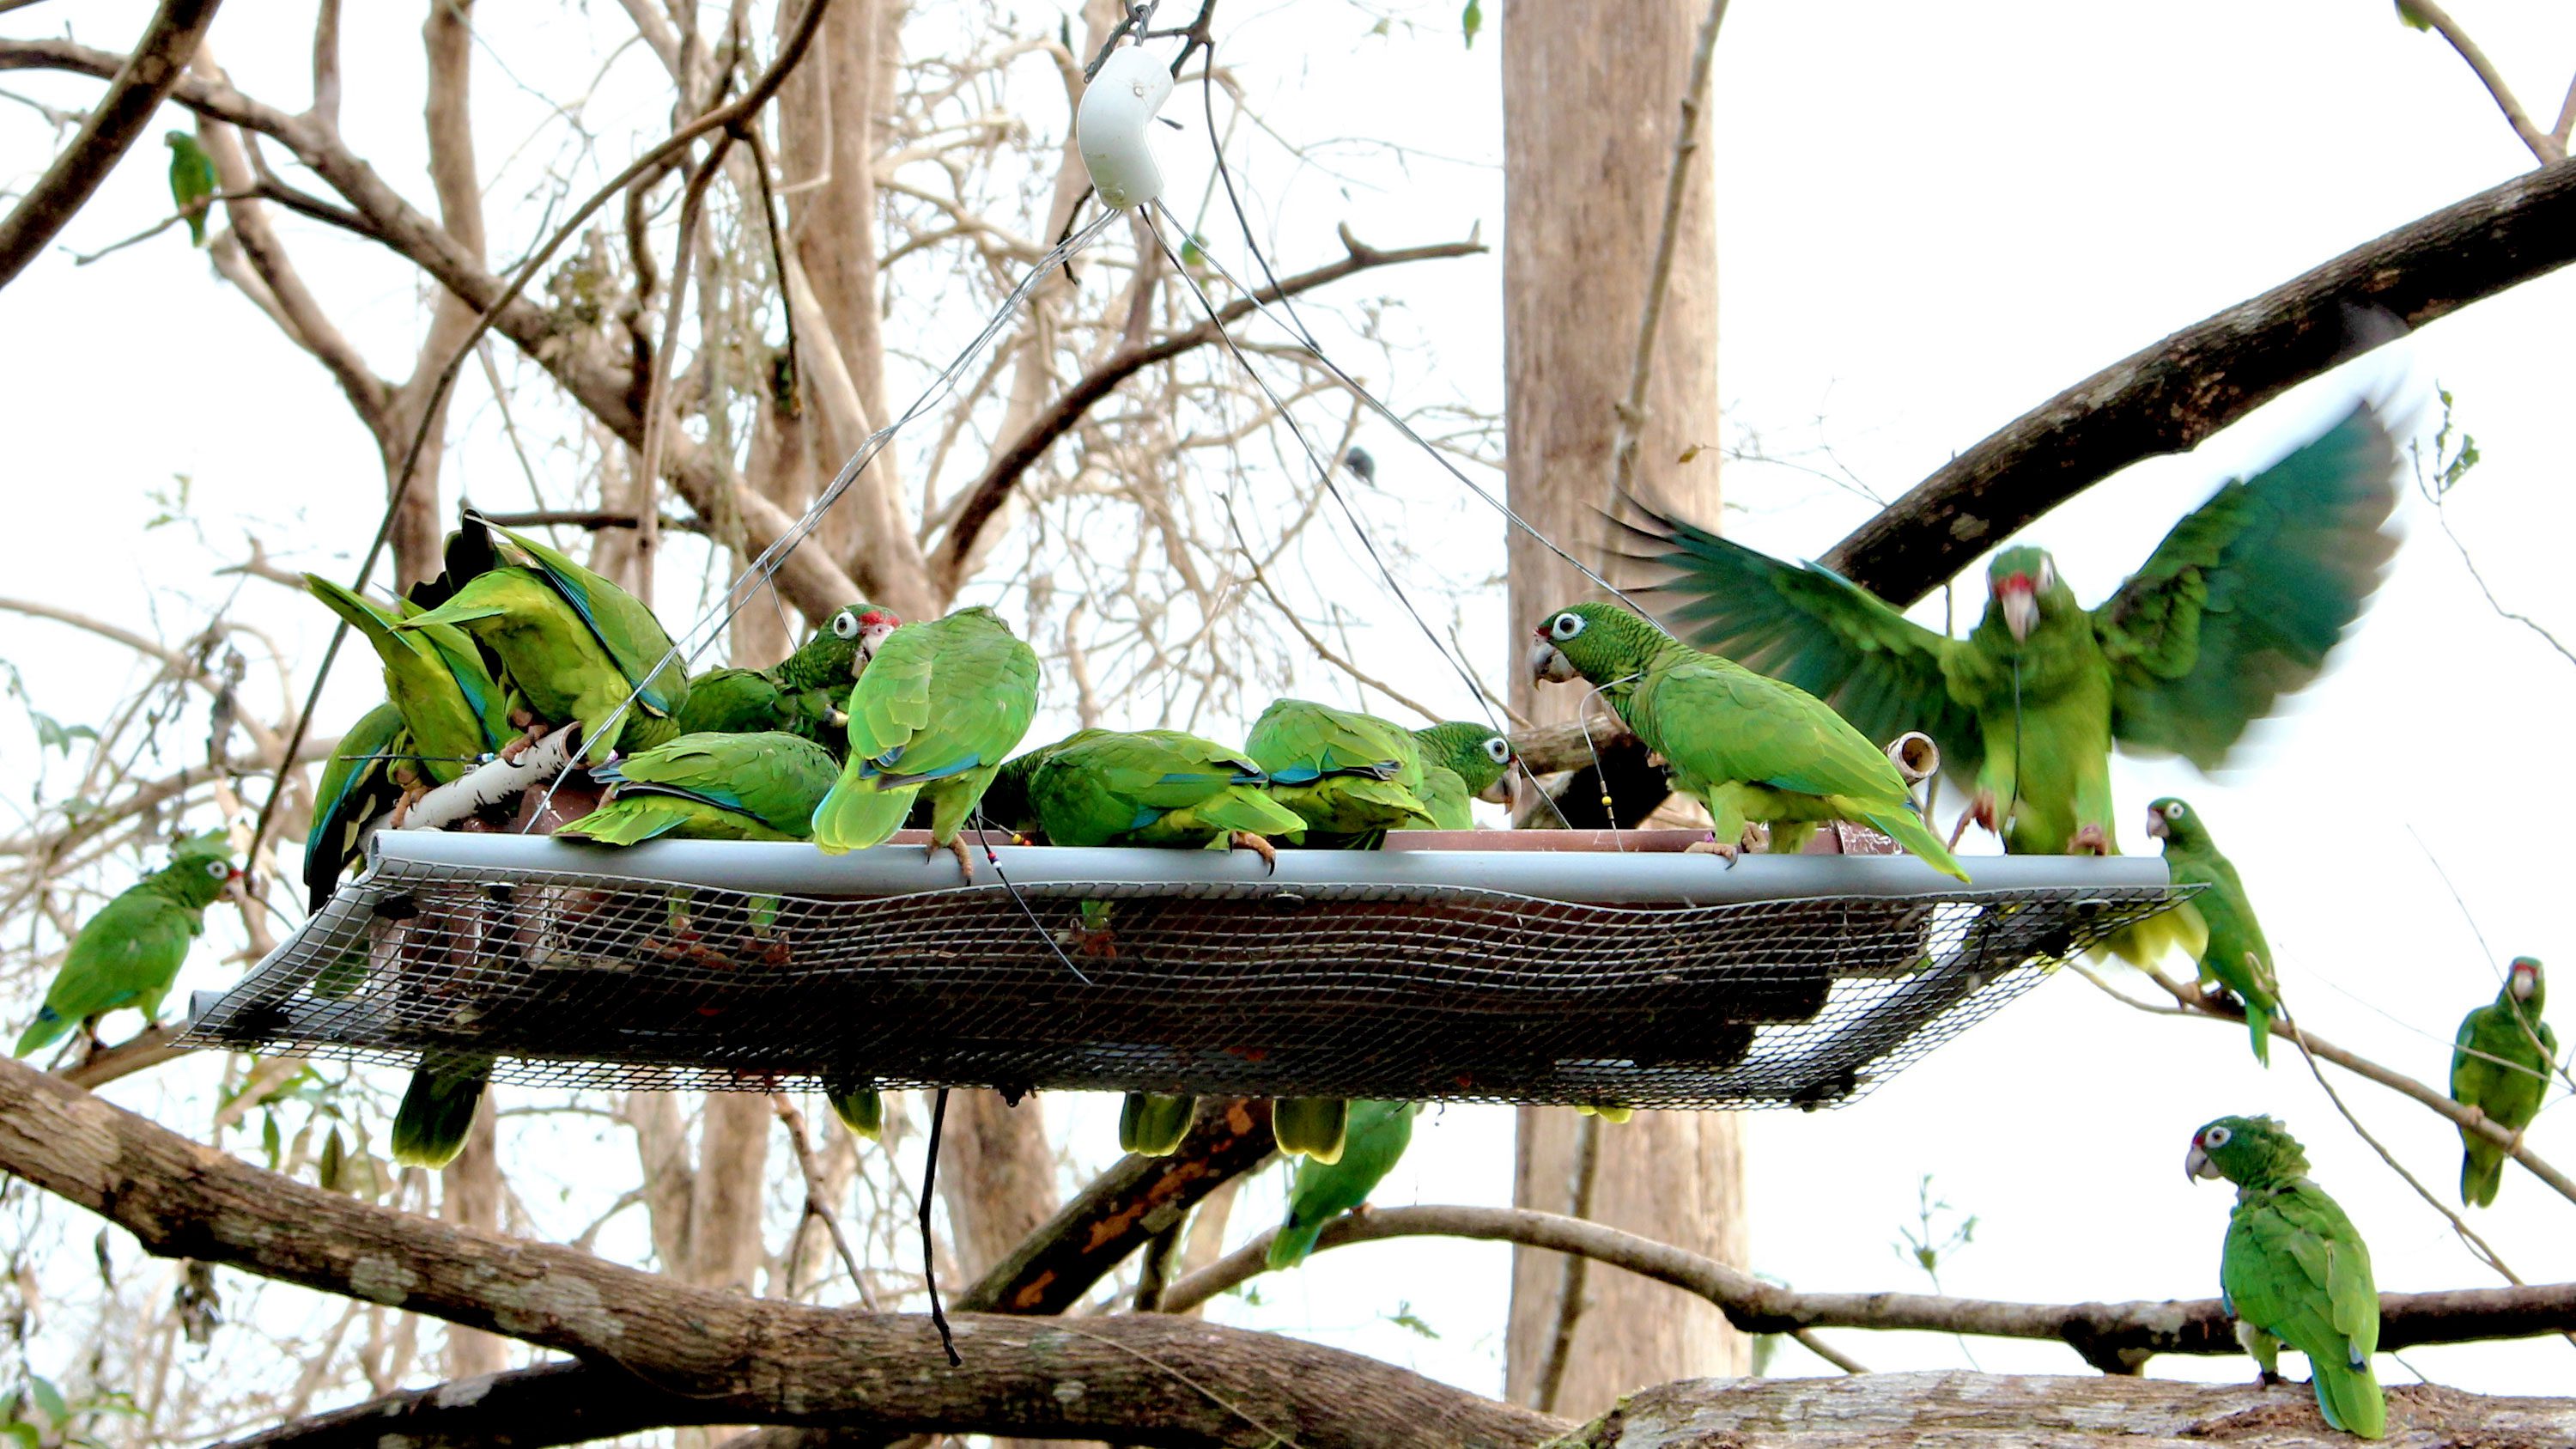 After the hurricanes, parrots were fed by the aviary staff. Photo by Ricardo Valentin.